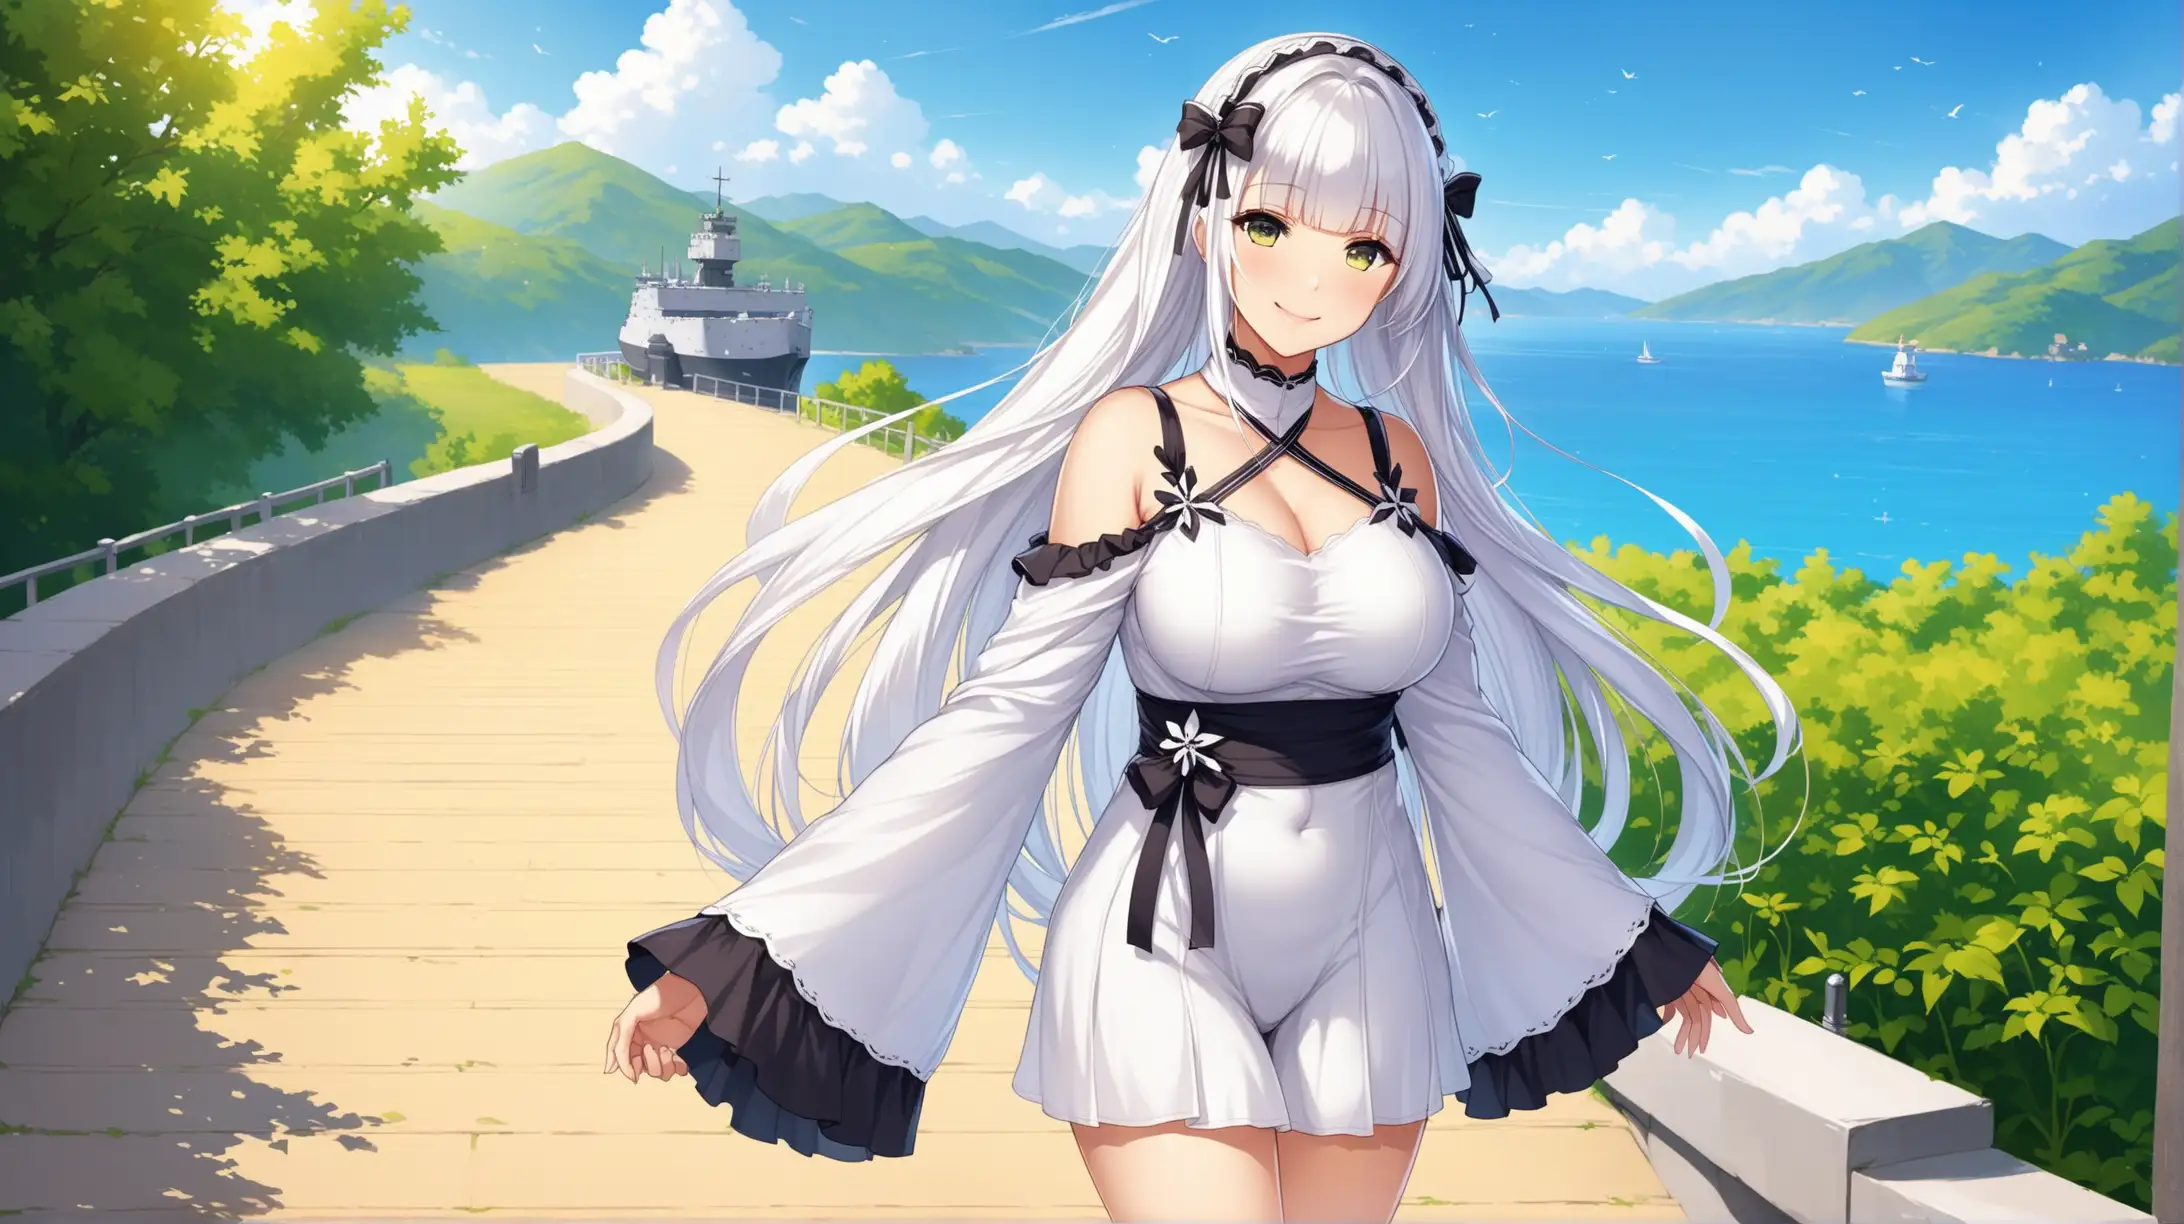 Draw the character Illustrious from Azur Lane, high quality, outdoors, standing in a relaxed pose, medium shot, casual clothing, smiling at the viewer